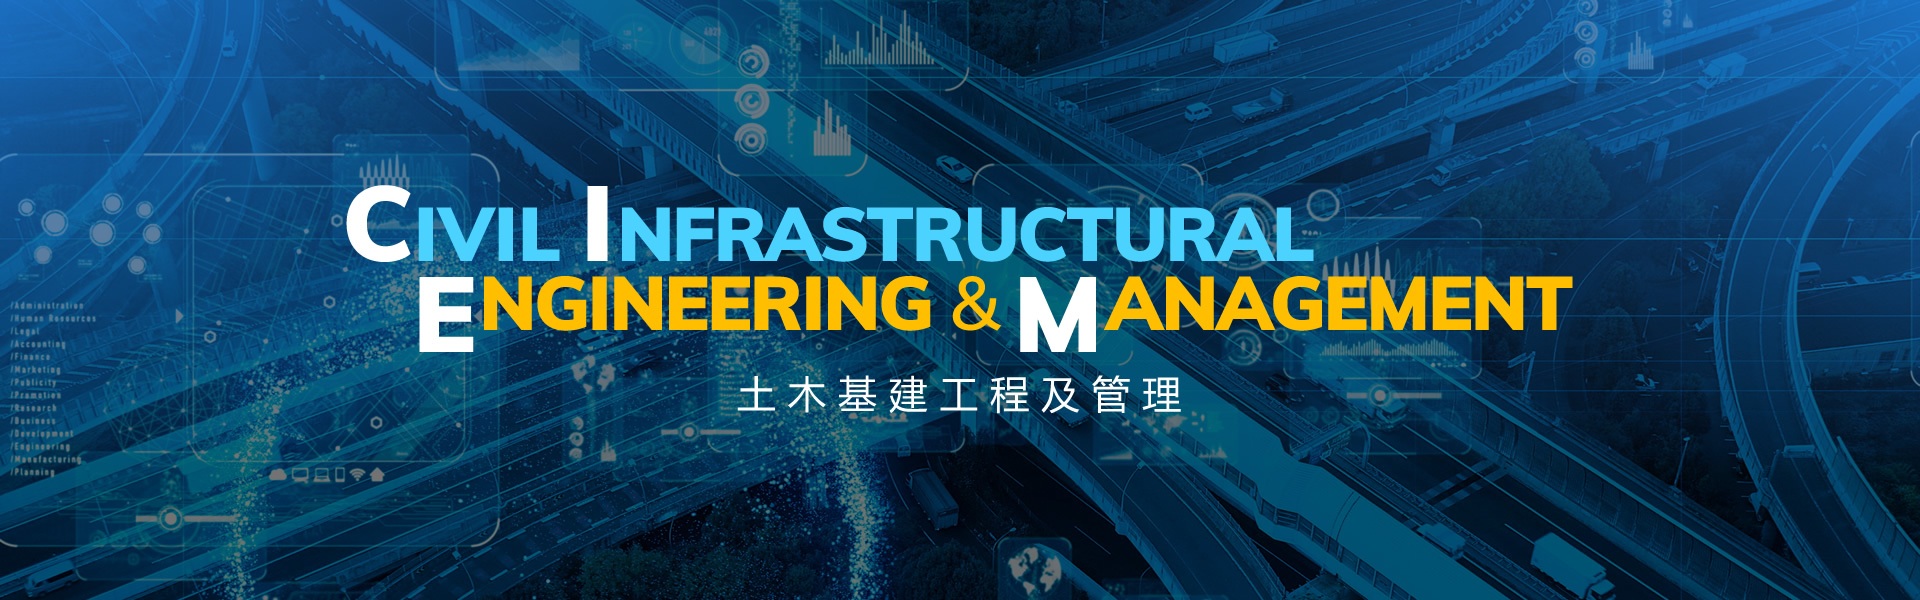 Civil Infrastructural Engineering and Management